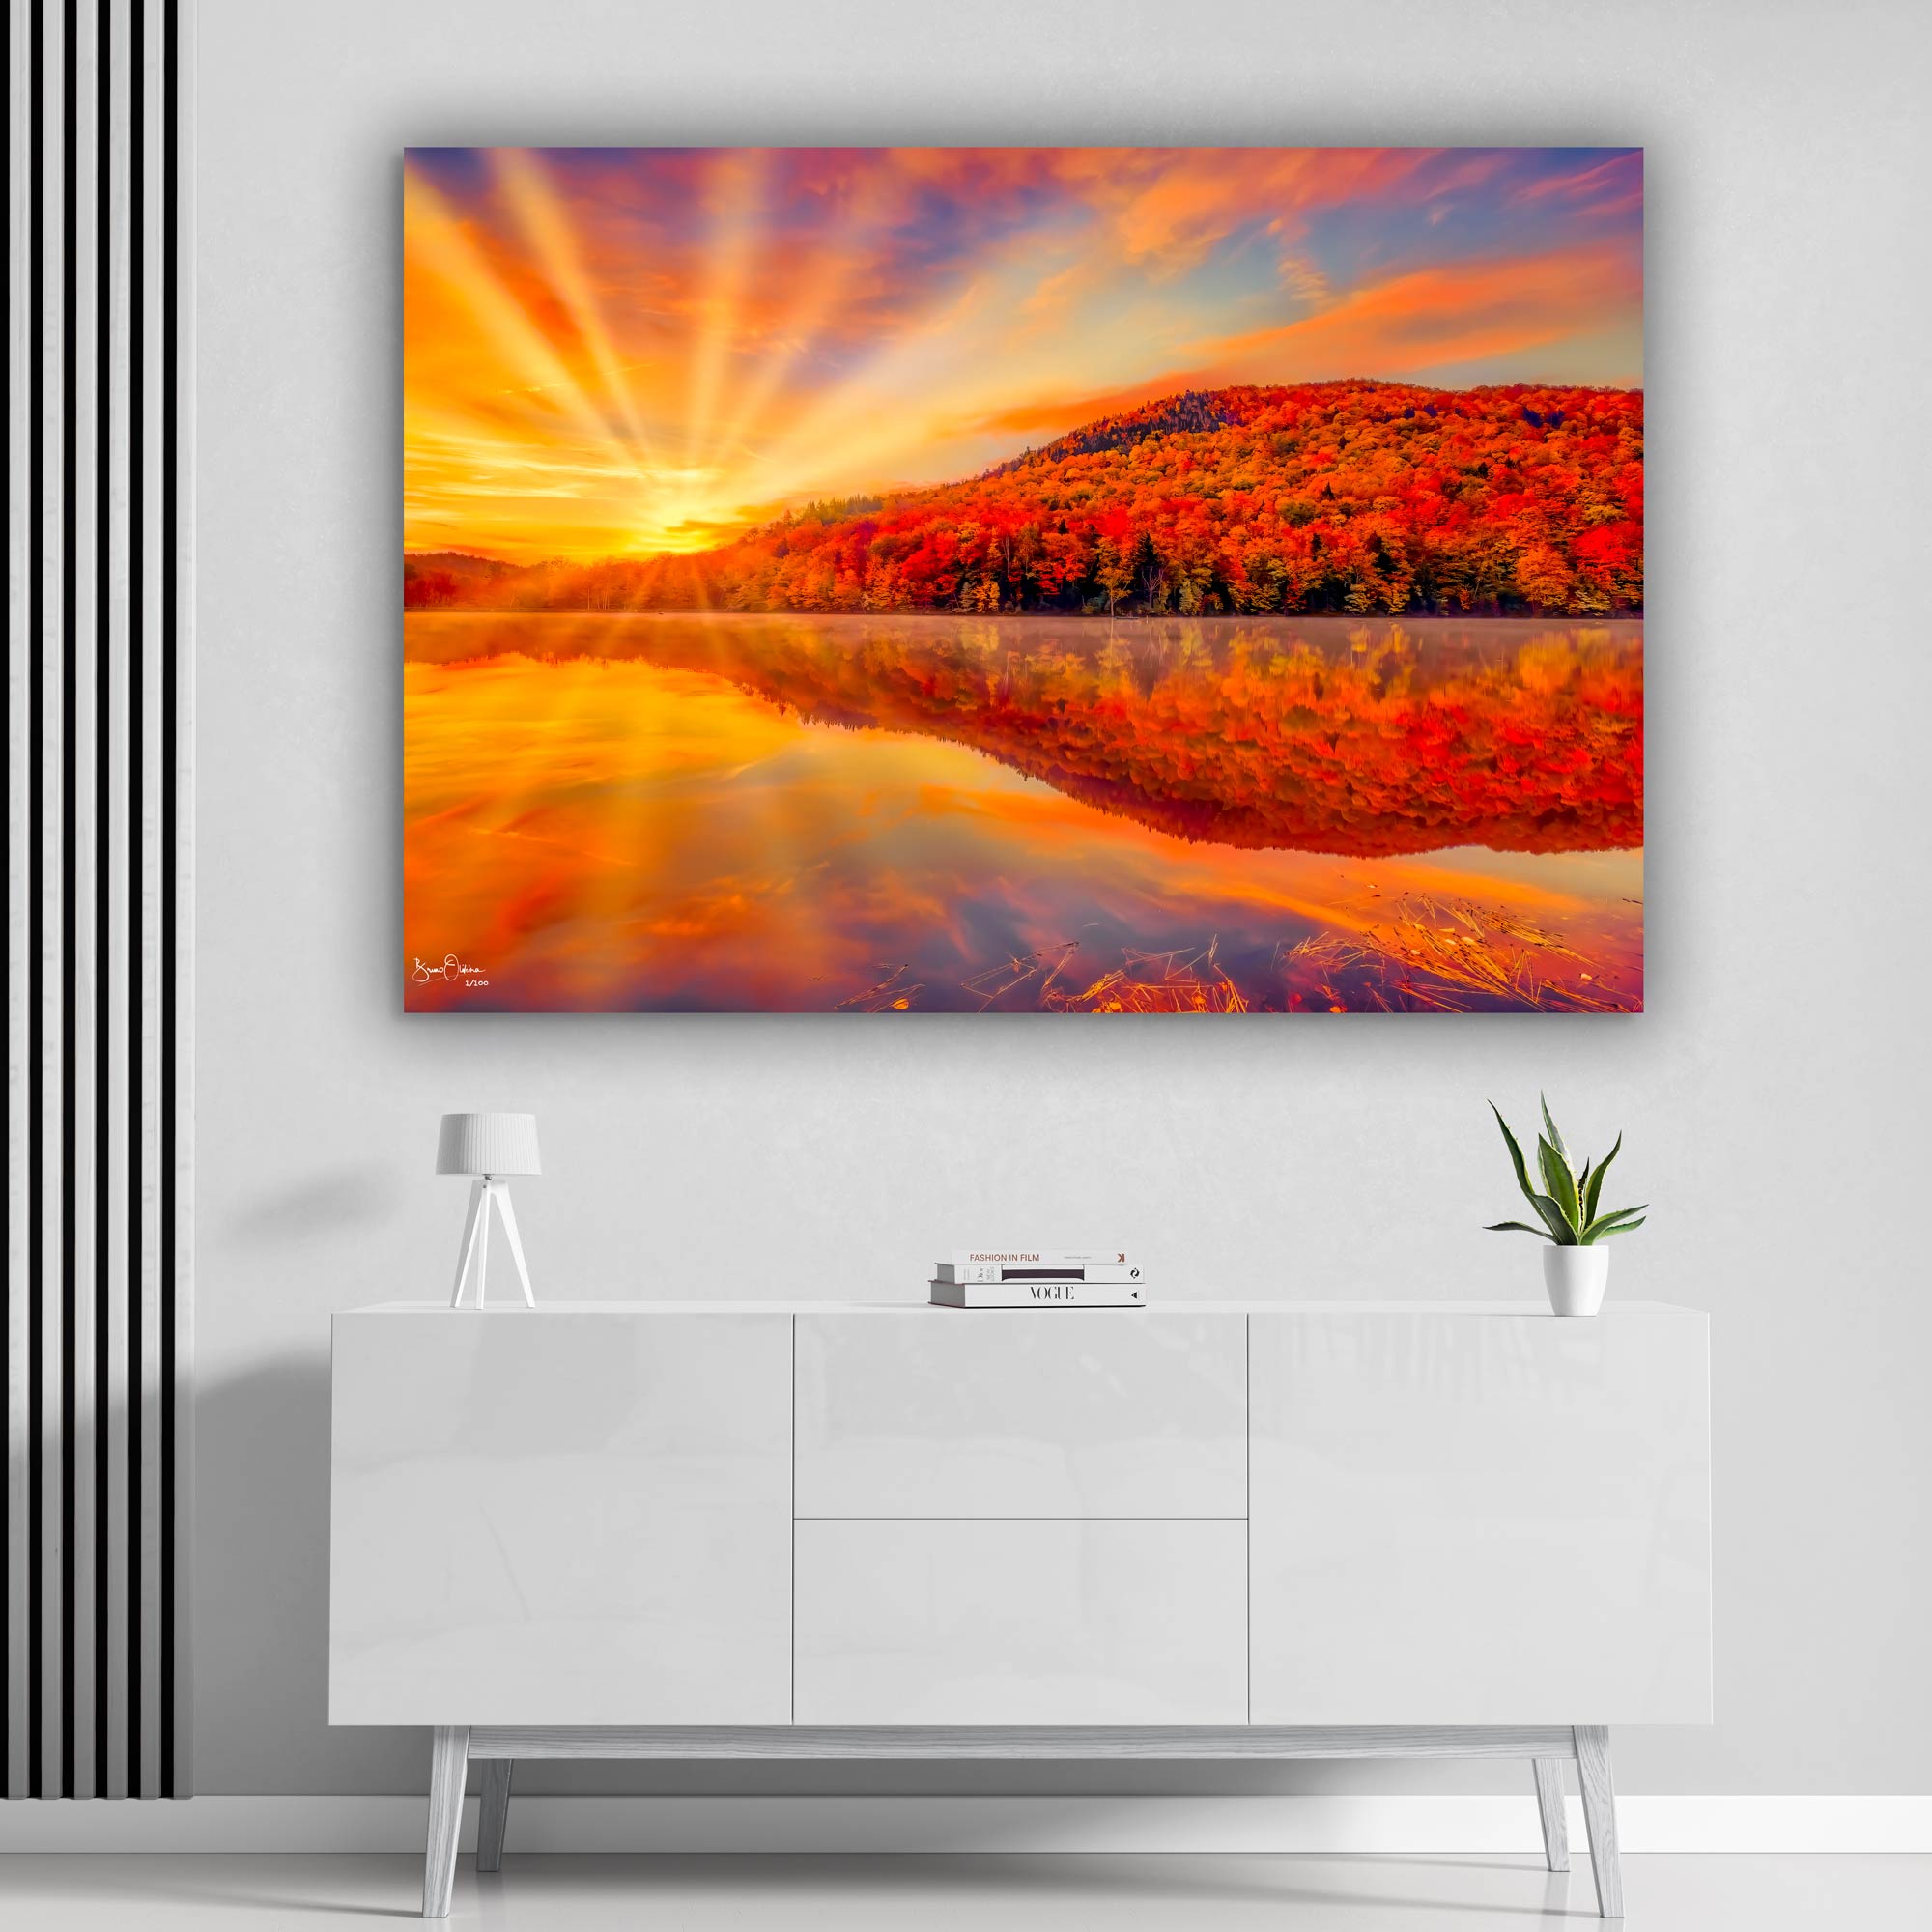 An Explosion of Color Collection - Fall Wall Art Prints